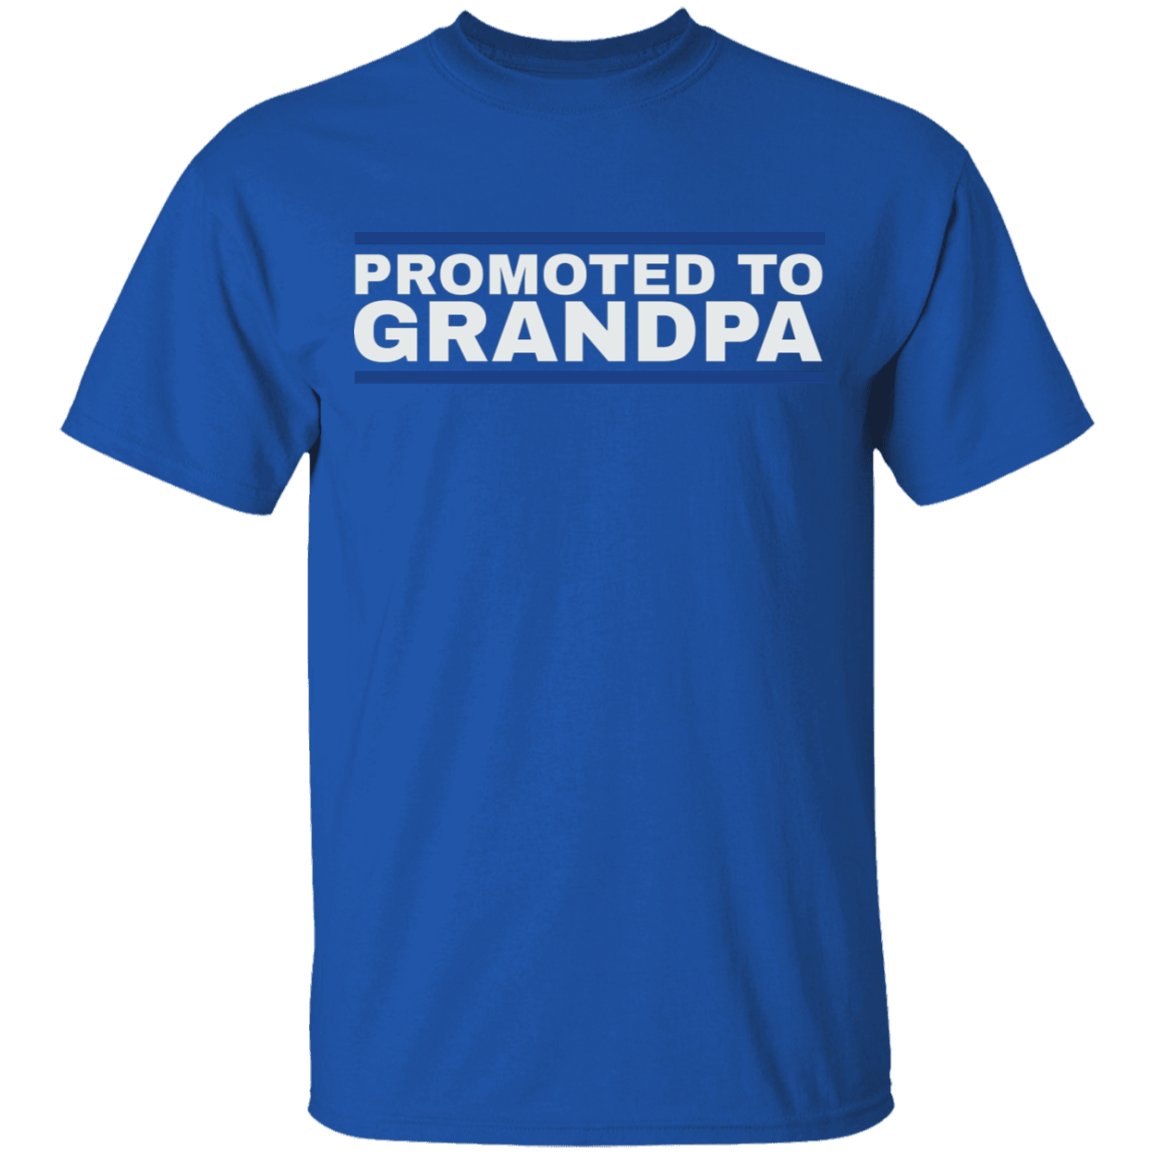 Promoted to Grandpa T-Shirt